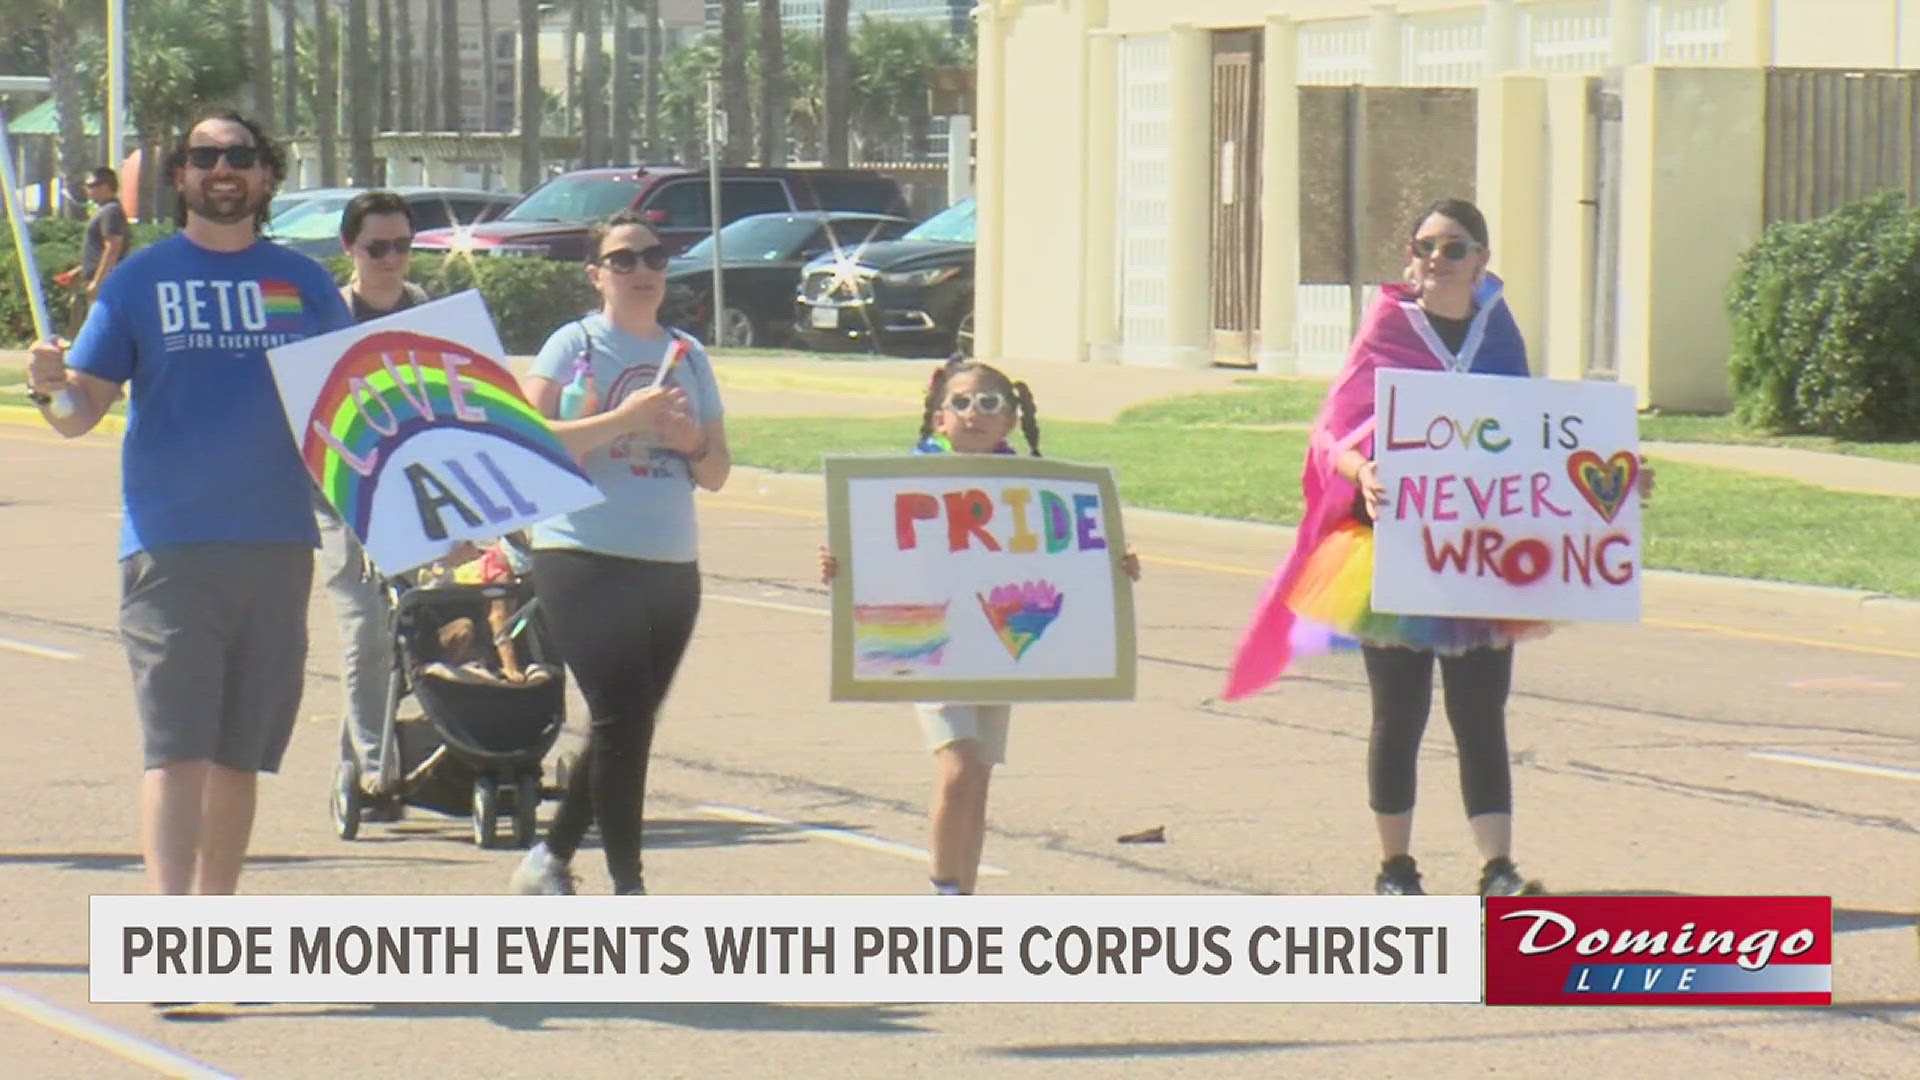 Pride Corpus Christi has a ton of events scheduled to help people celebrate and learn more about the LGBTQ+ community for the month of June.